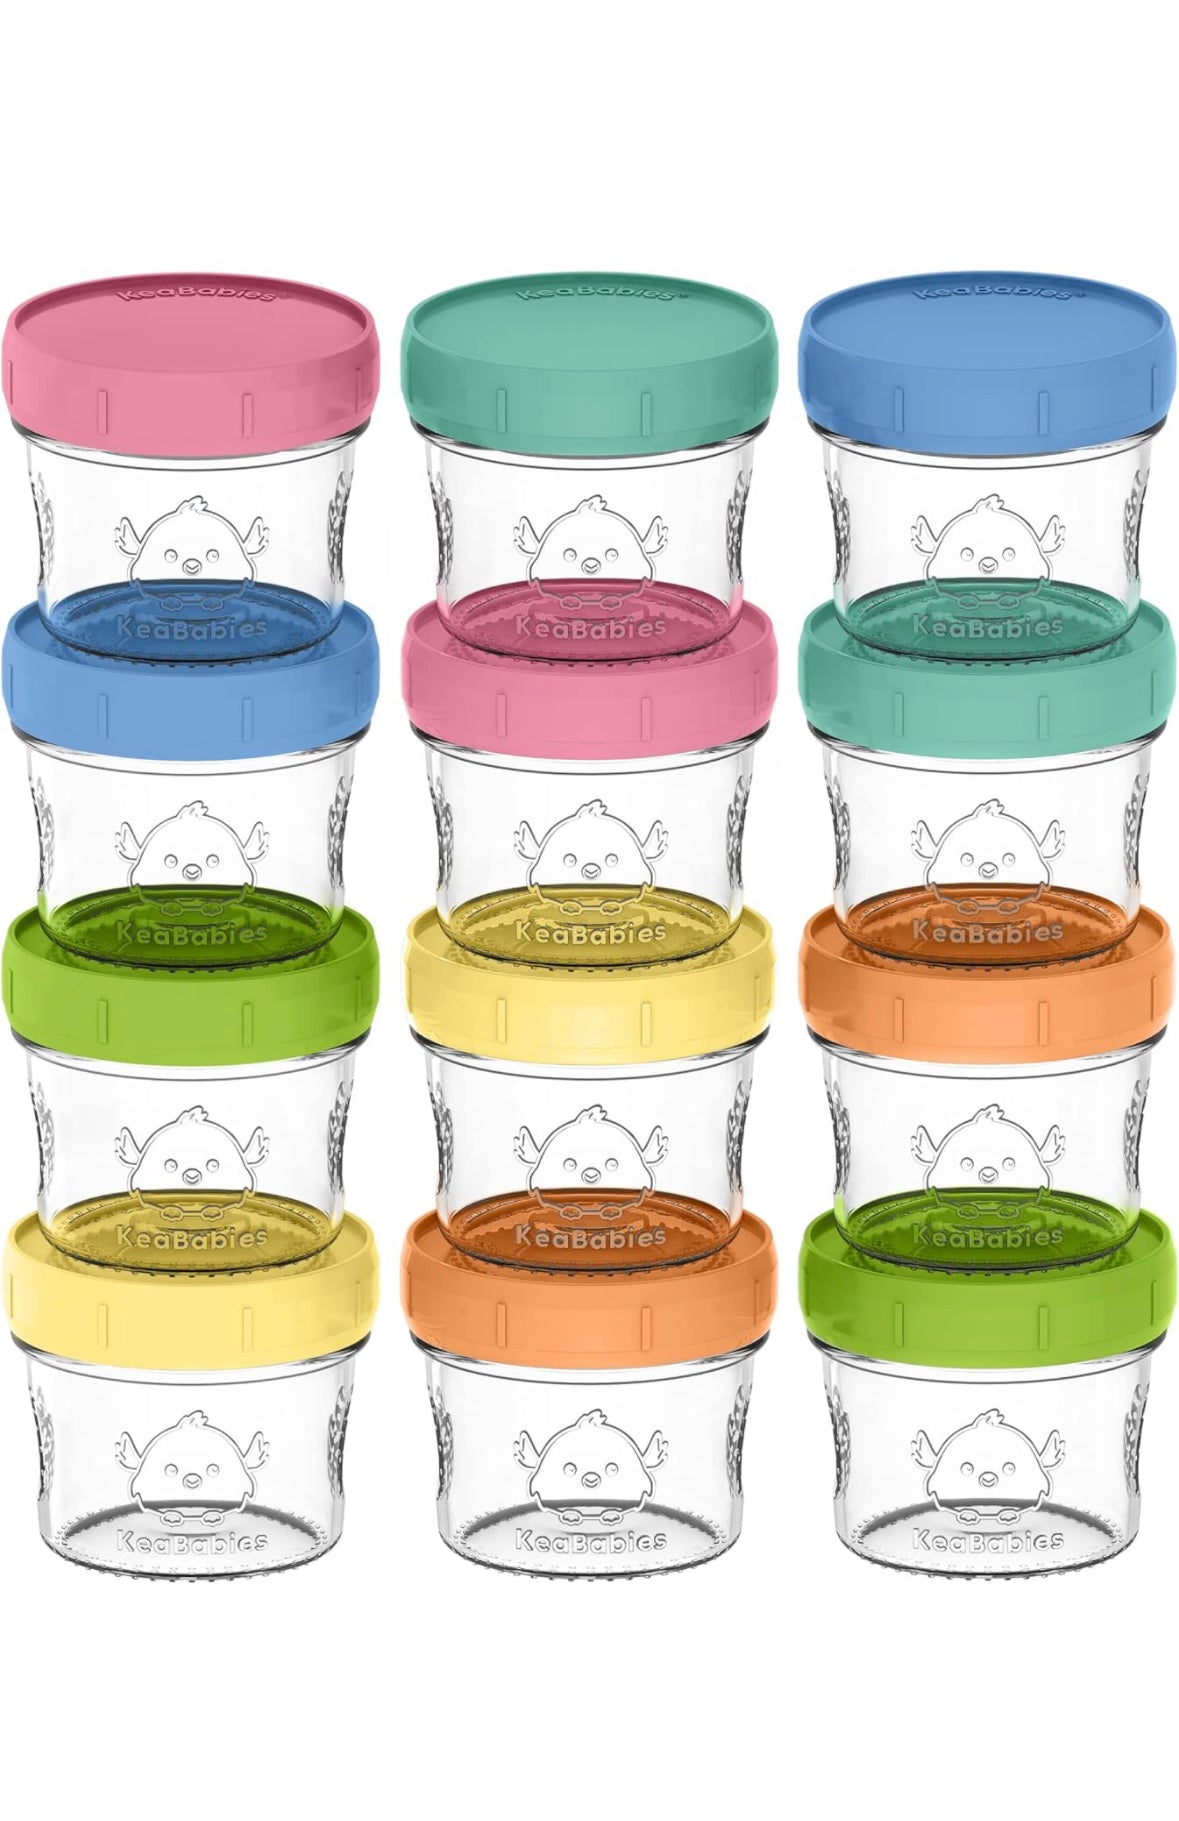 KeaBabies 12-Pack Glass Baby Food Containers - 4 oz Leak-Proof.